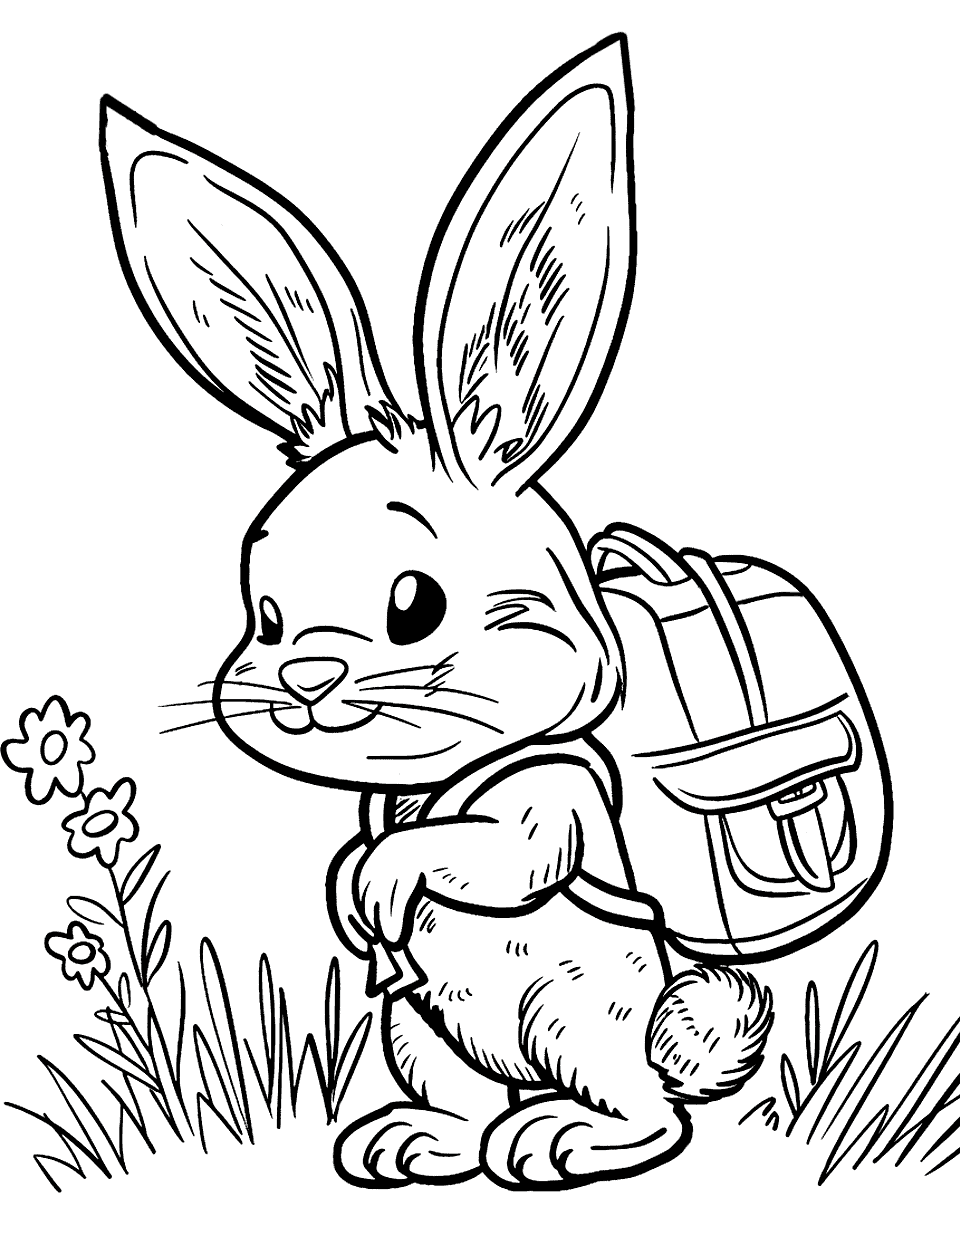 Bunny's Day Out Easter Bunny Coloring Page - A bunny outside, wearing a small backpack, ready for an adventure.